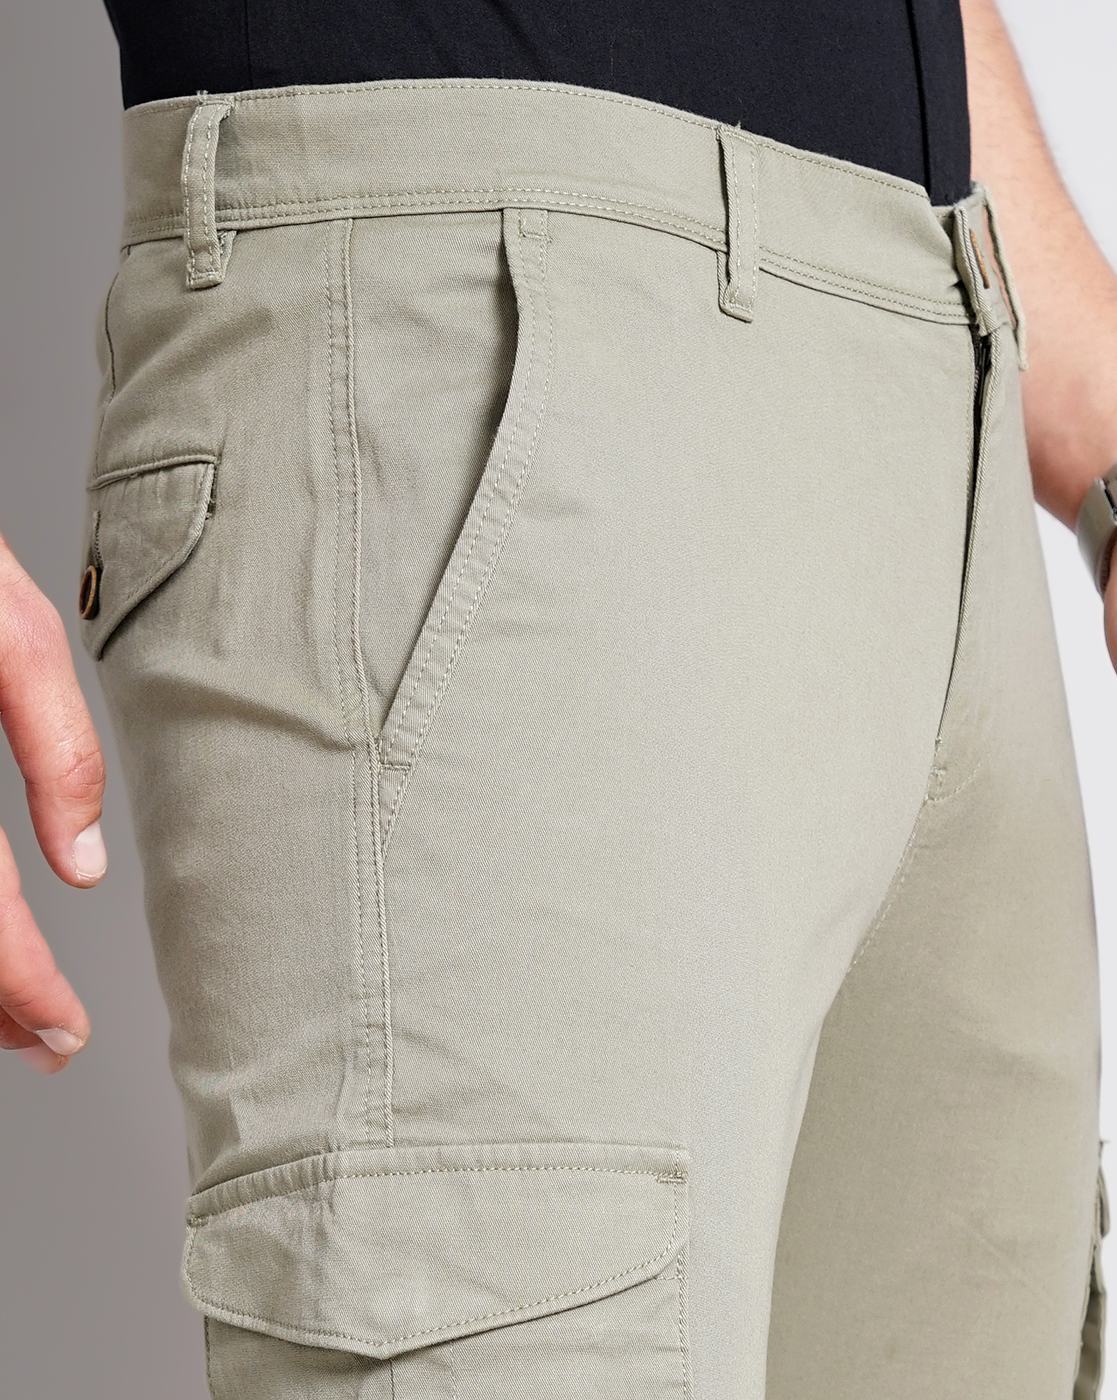 What color top will go with olive pants? - Quora